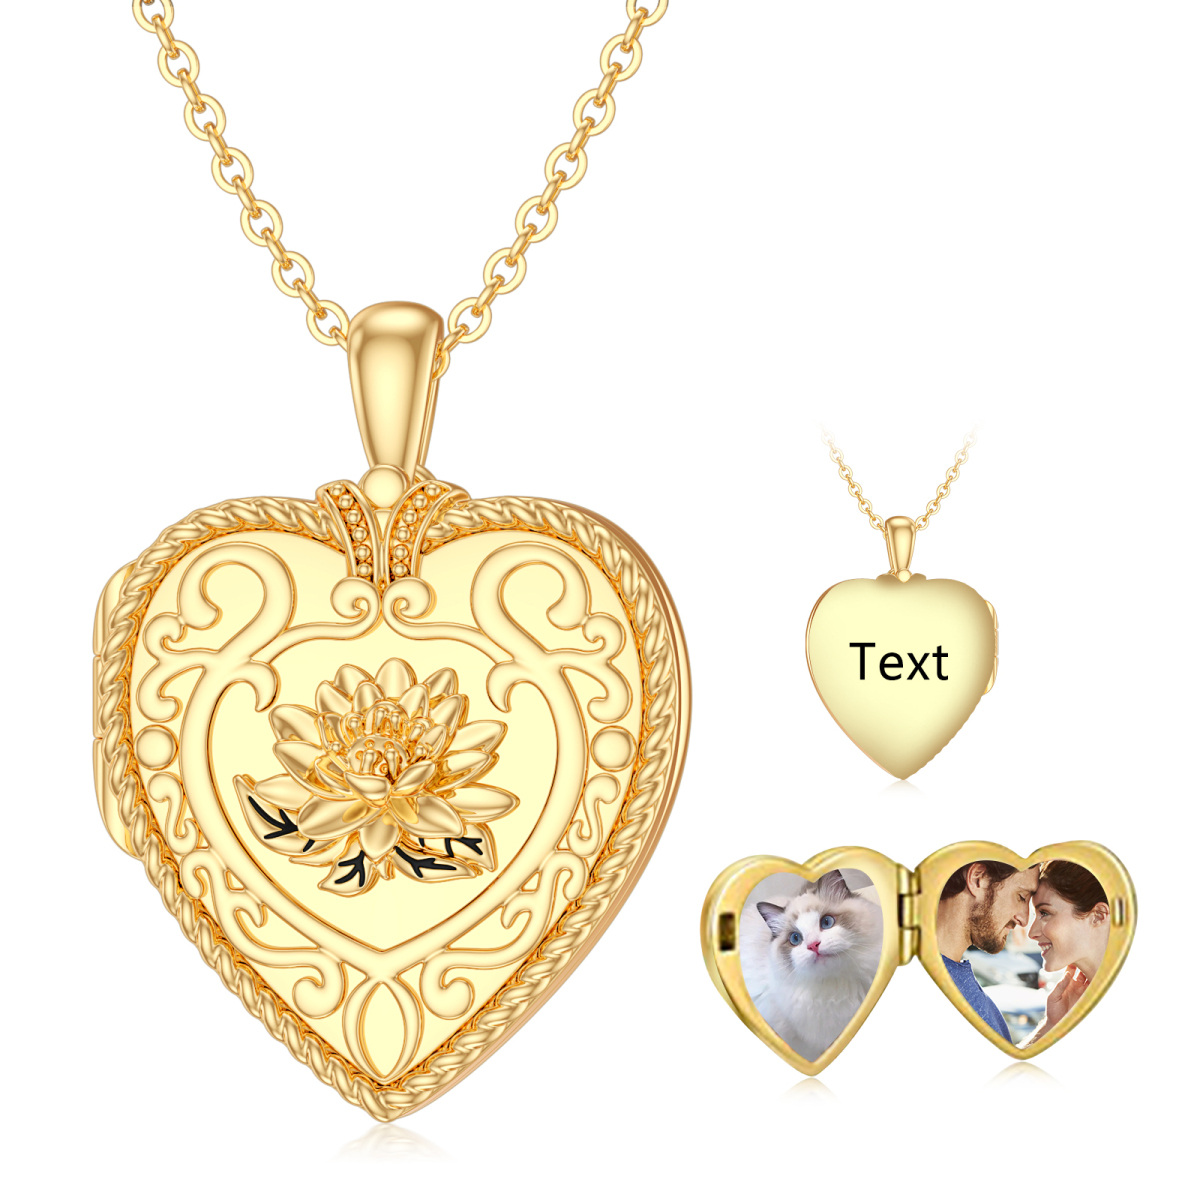 10K Gold Lotus & Heart Personalized Photo Locket Necklace-1